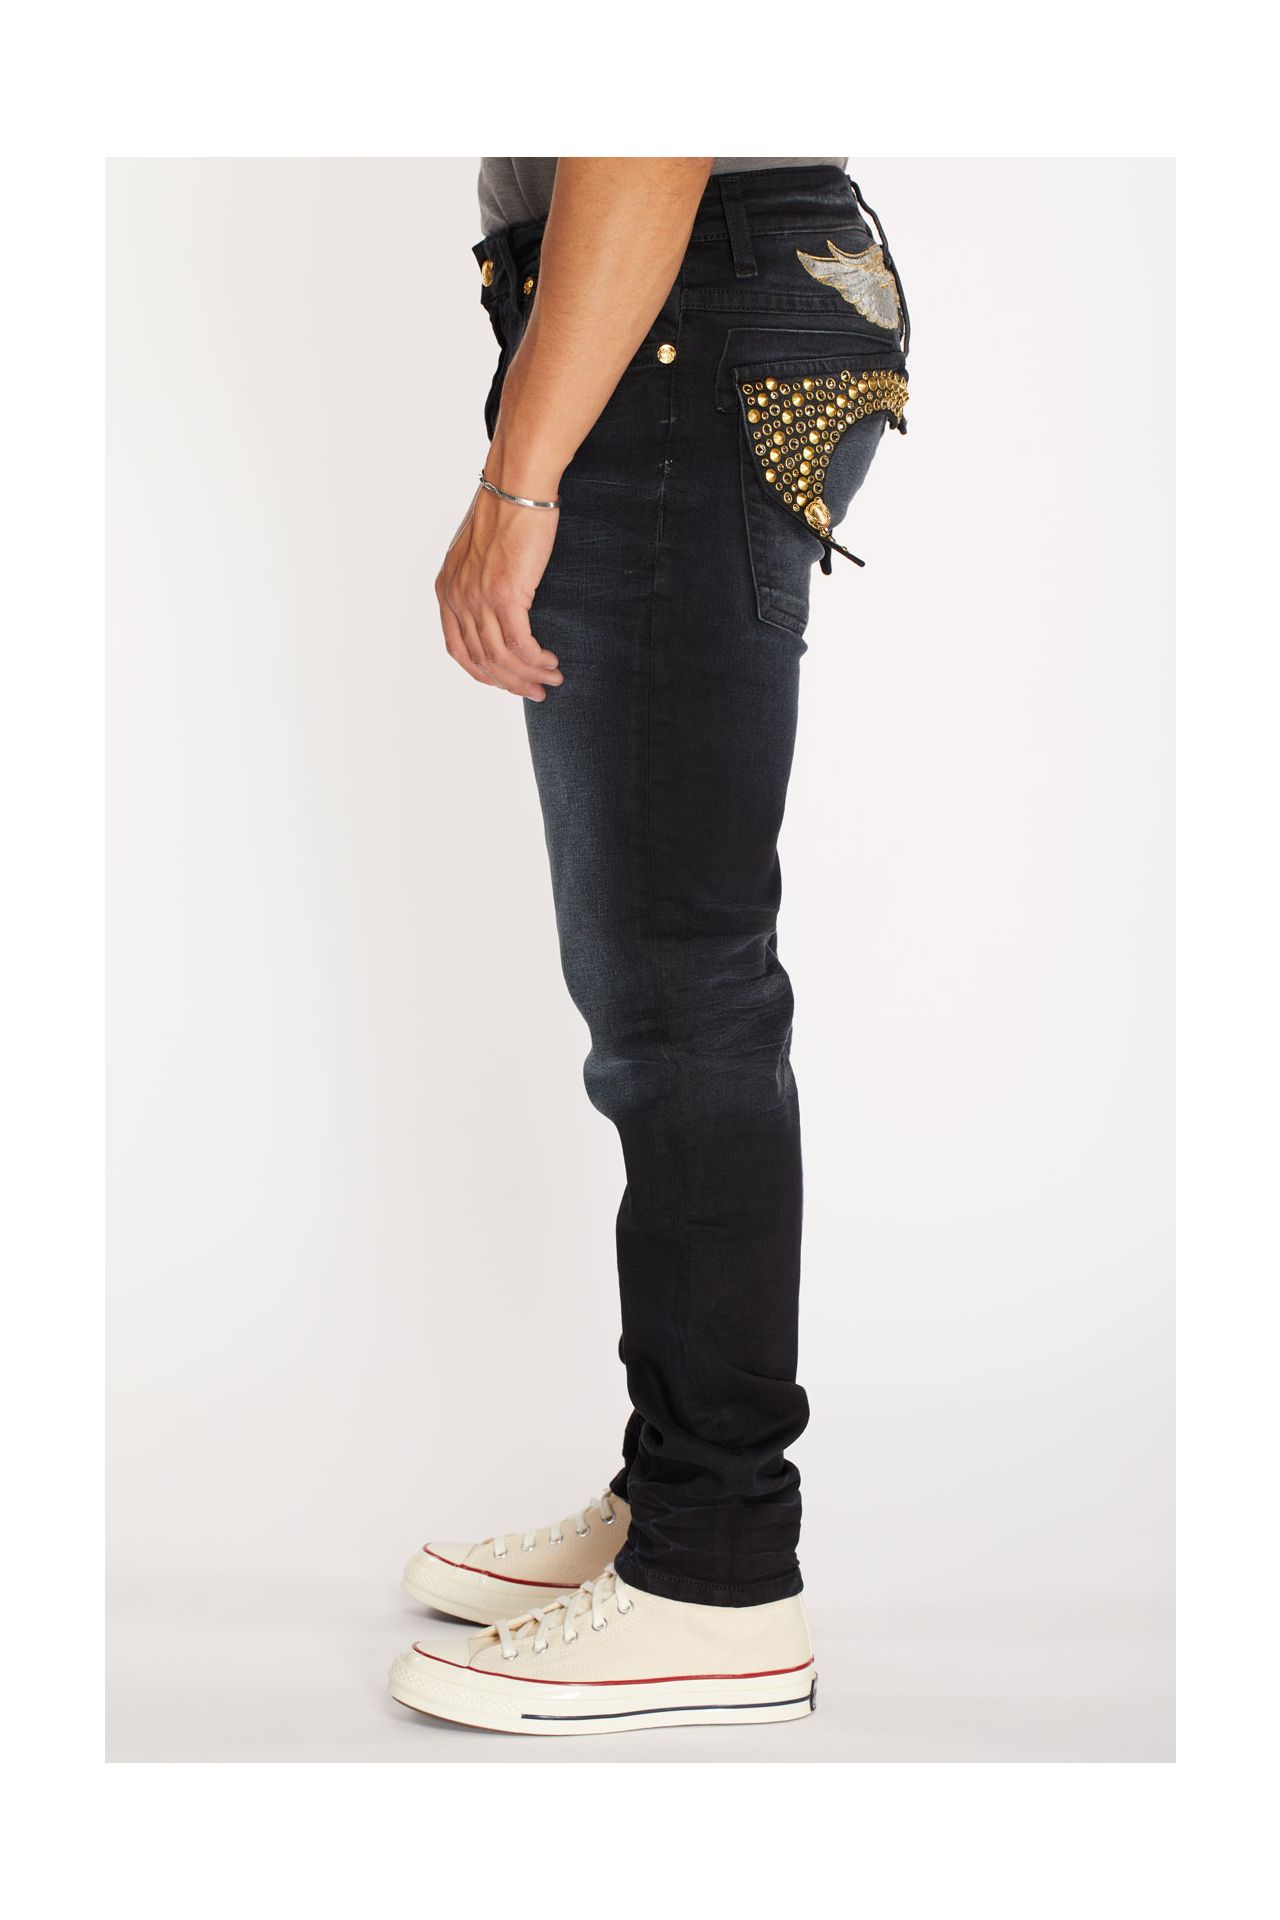 KILLER FLAP MENS SKINNY JEANS IN F_UP WITH CRYSTAL AND SPIKE STUDDING